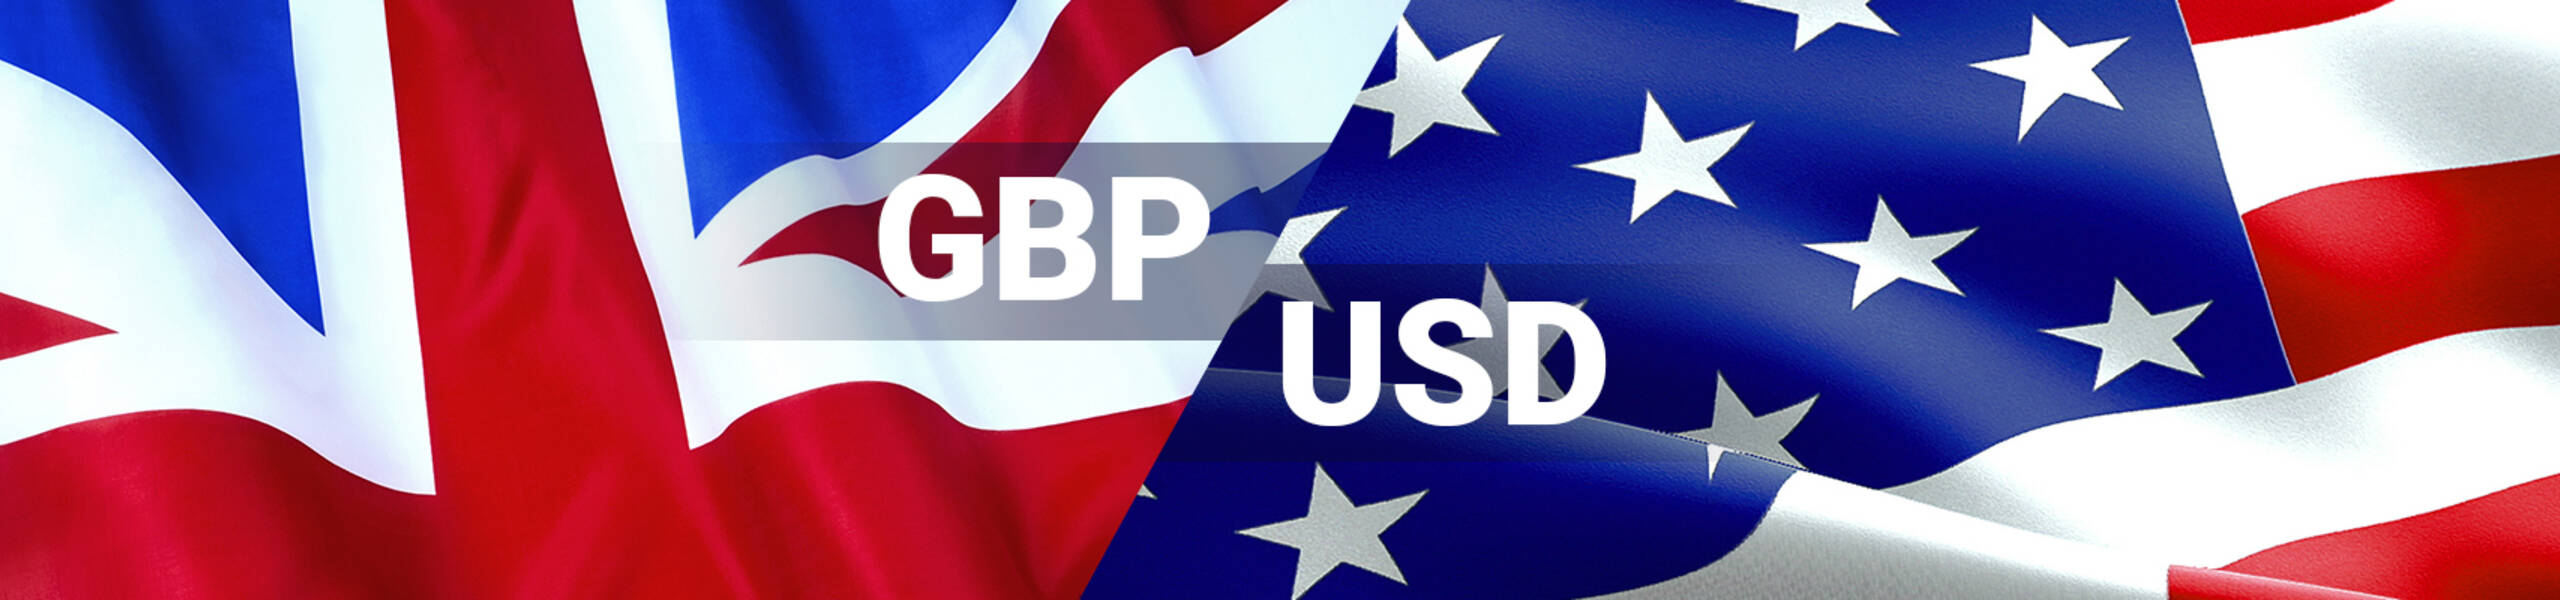 GBP/USD: market keep staying on Cloud